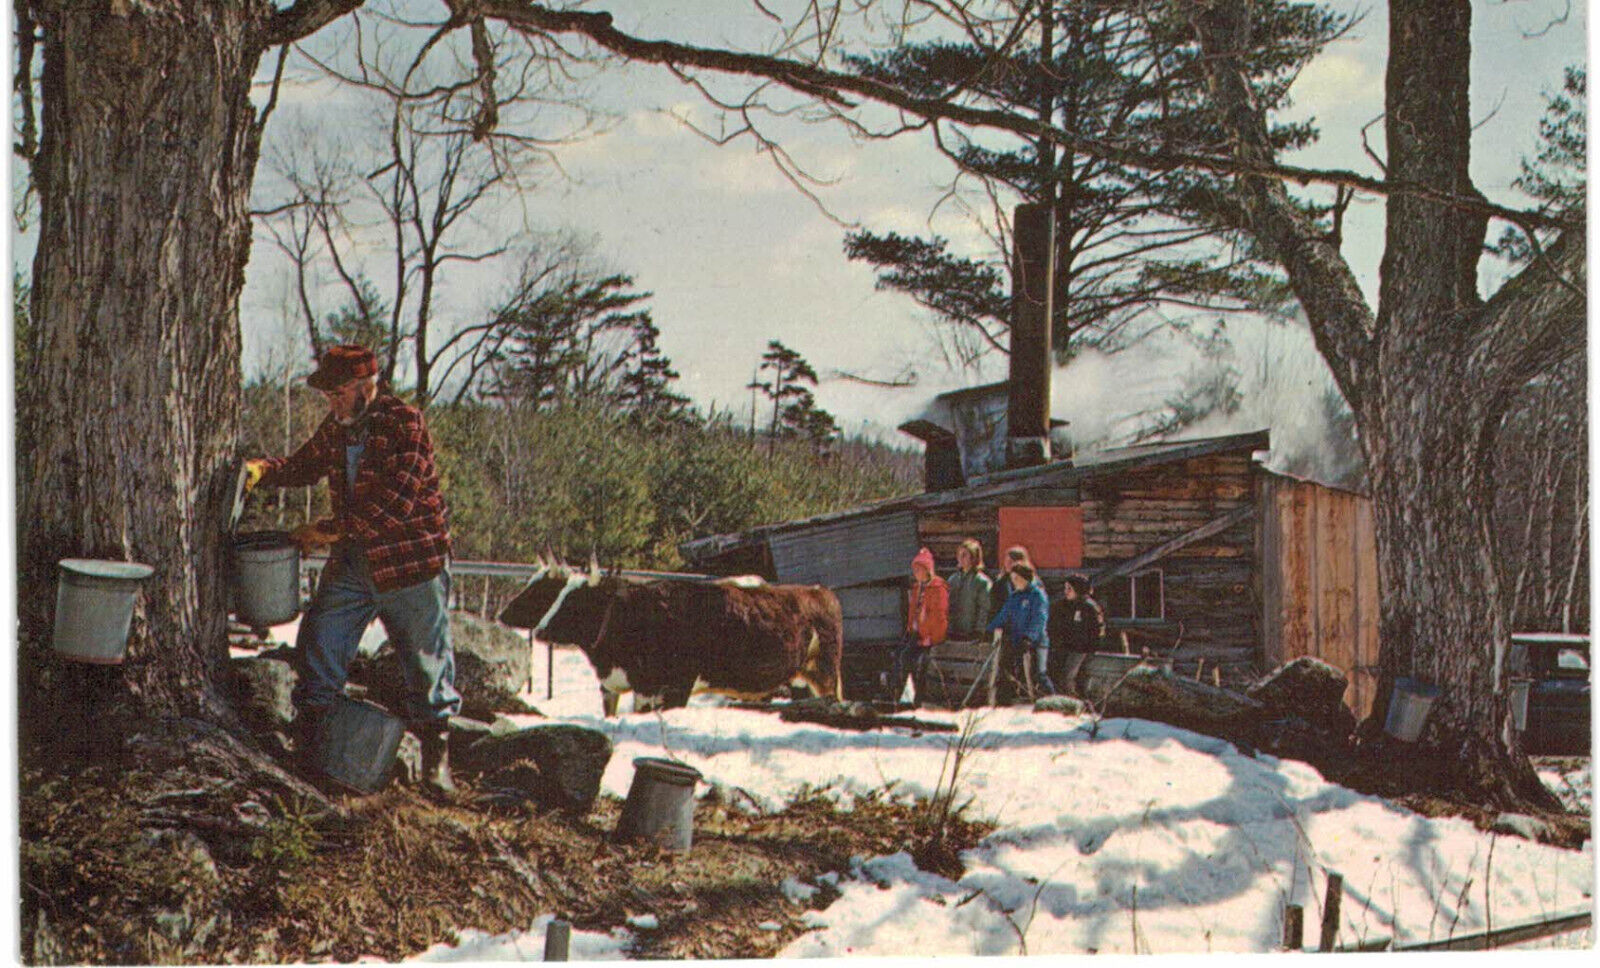 Middlebury, Vermont - Maple Sugar Time in New England - Vintage c1960 Postcard